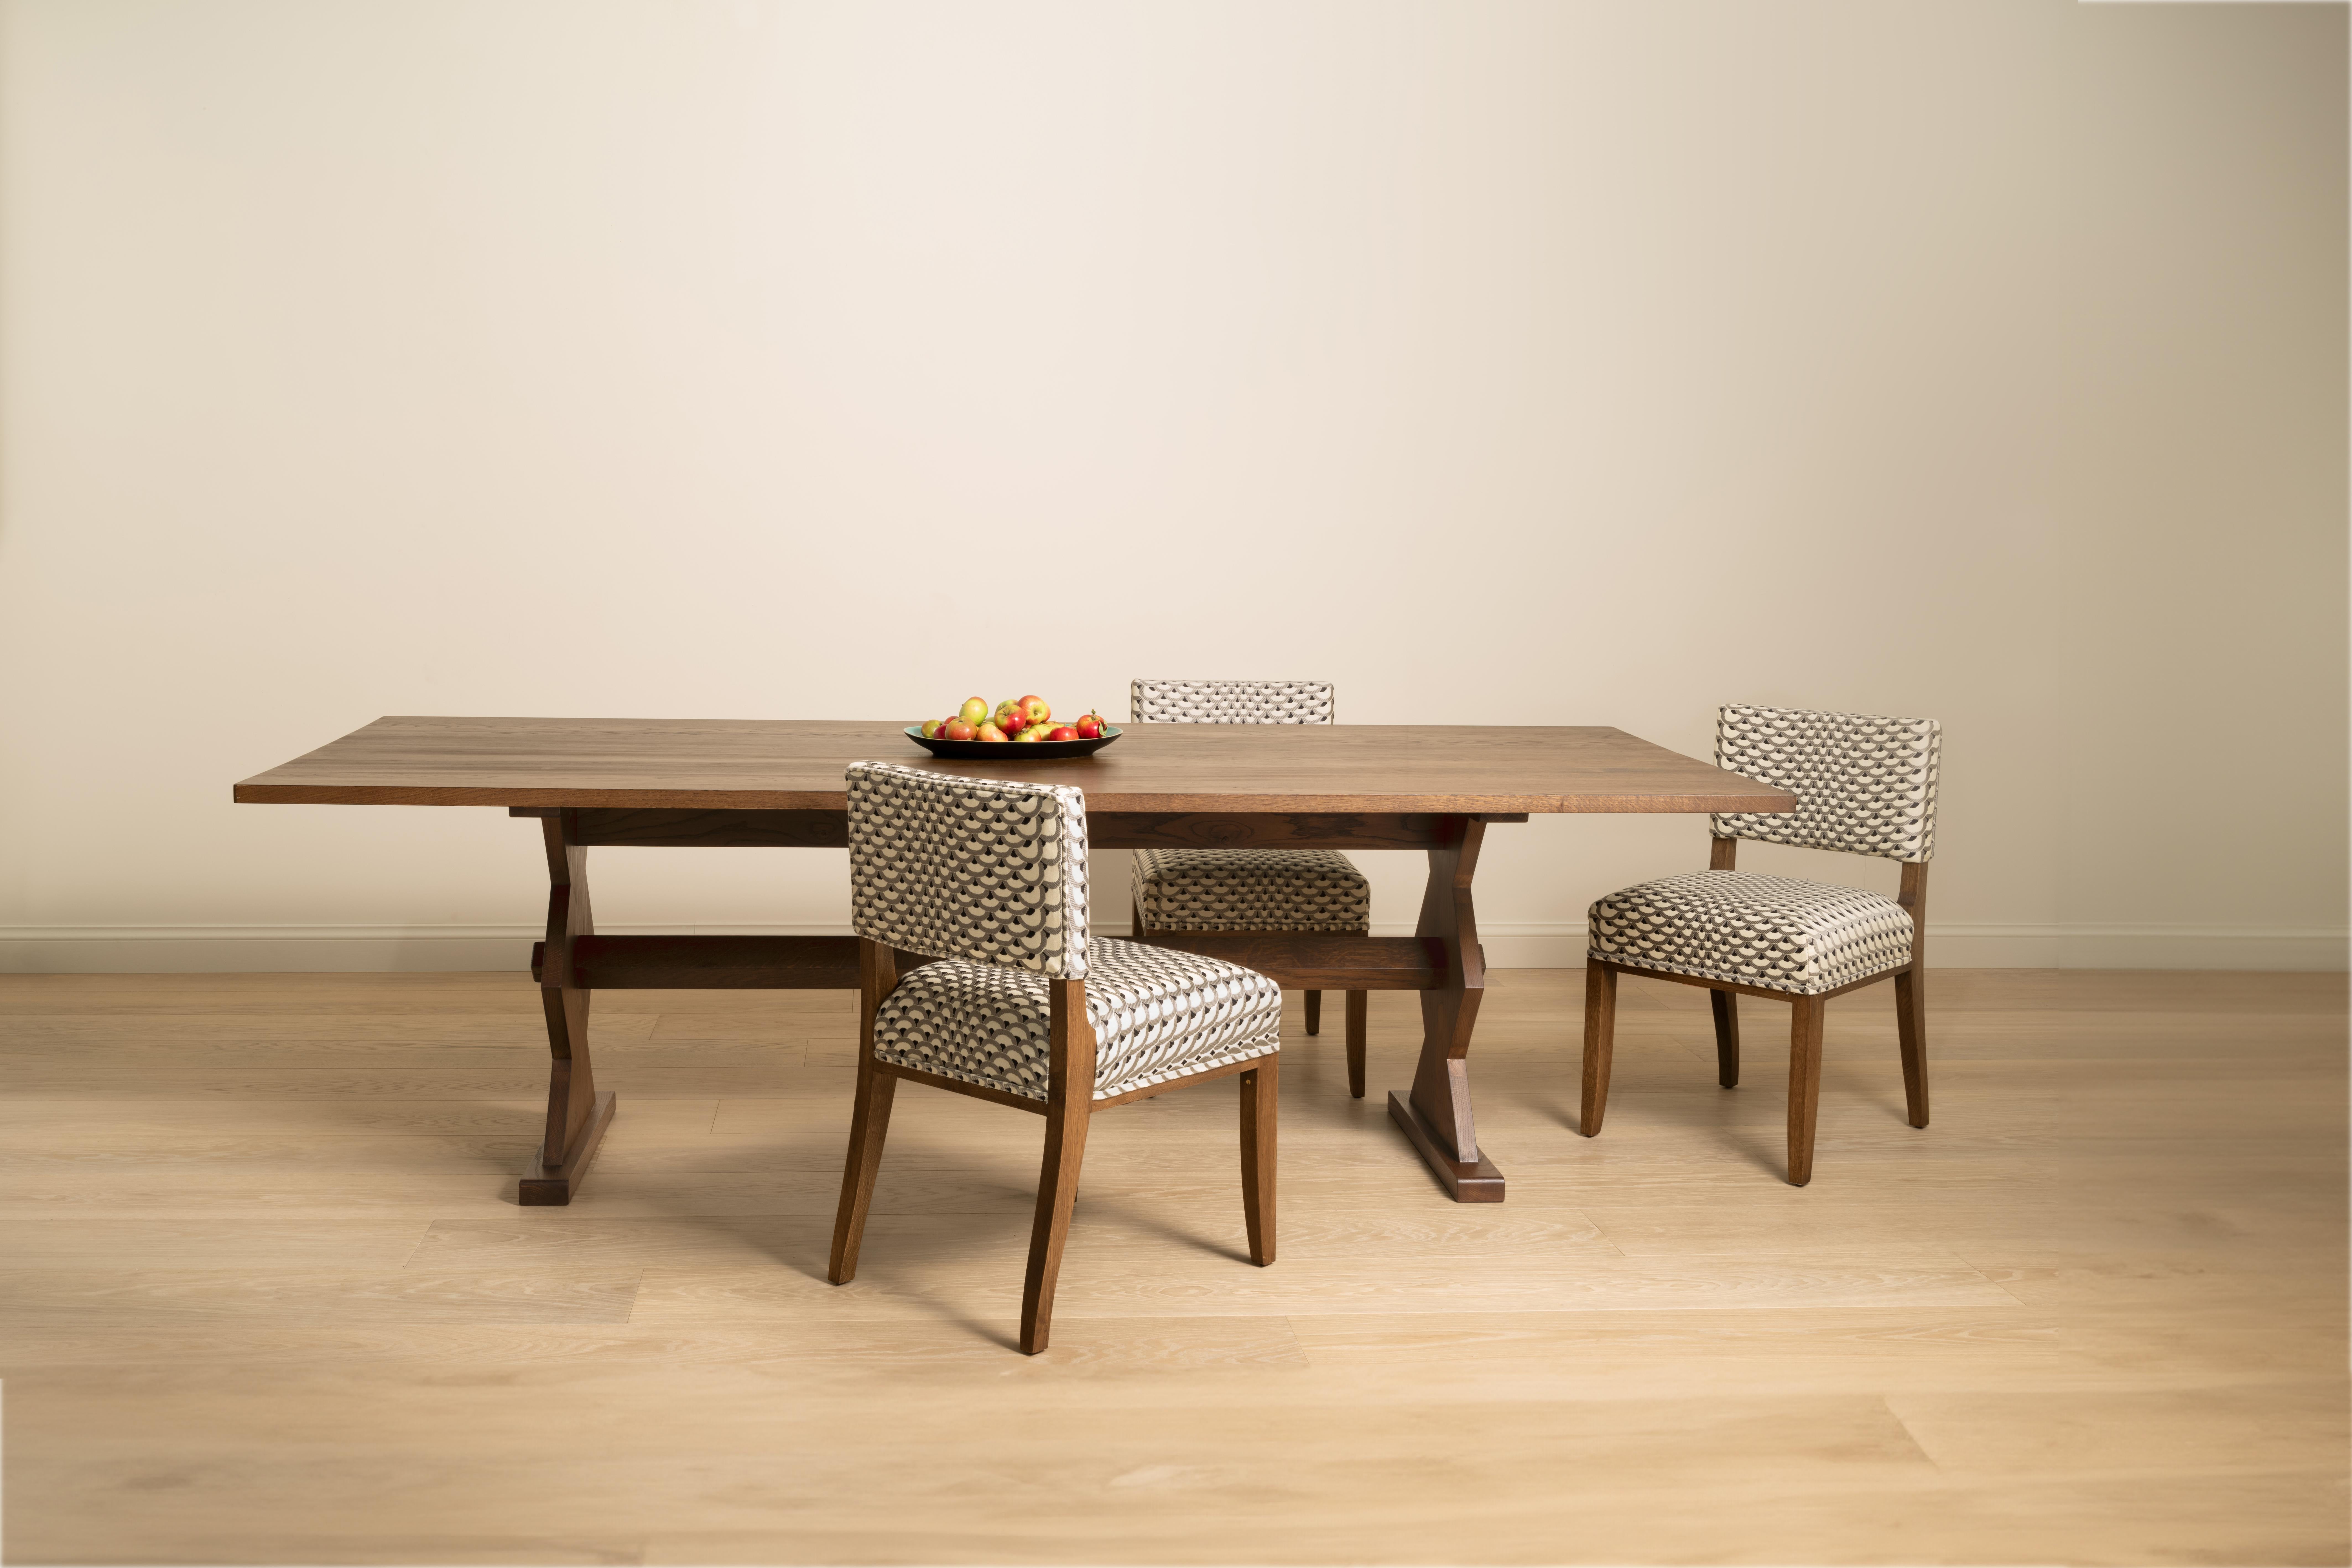 A contemporary dining table with geometrically shaped legs inspired by the designer Marcel Coard. Traditionally constructed in solid oak and available in a Light, Mid, Dark and Ebonised finish.
​
Available to view in our London showroom.